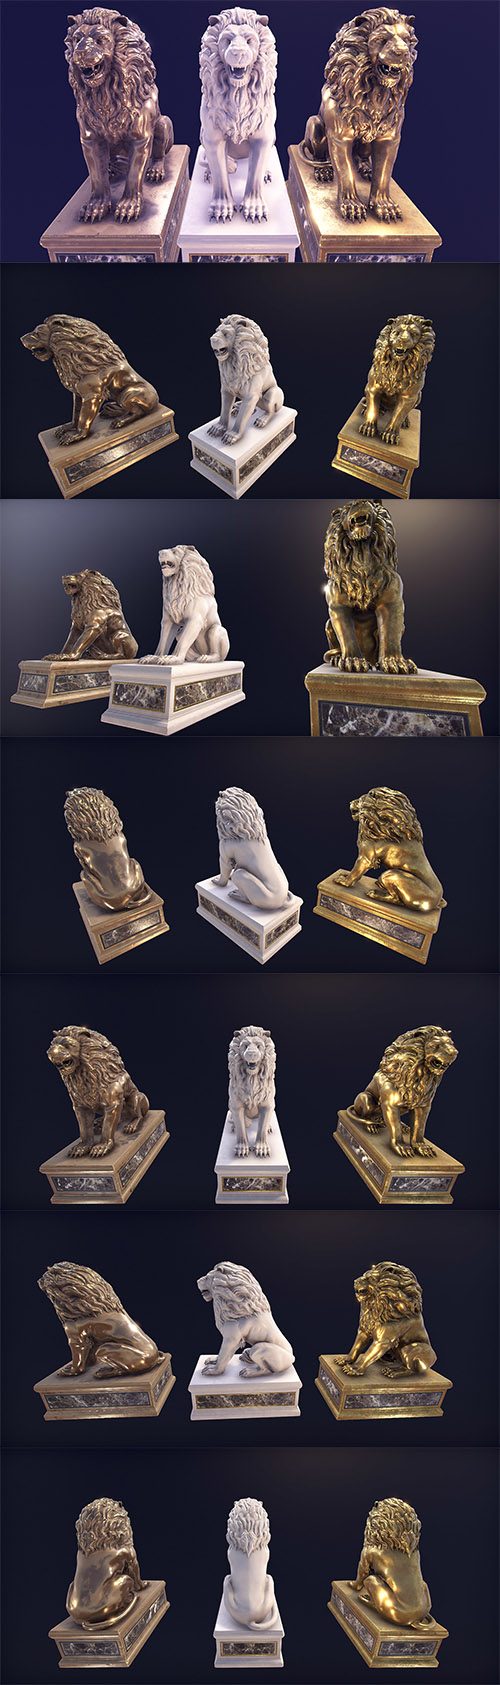 Cubebrush - A statue of a lion.